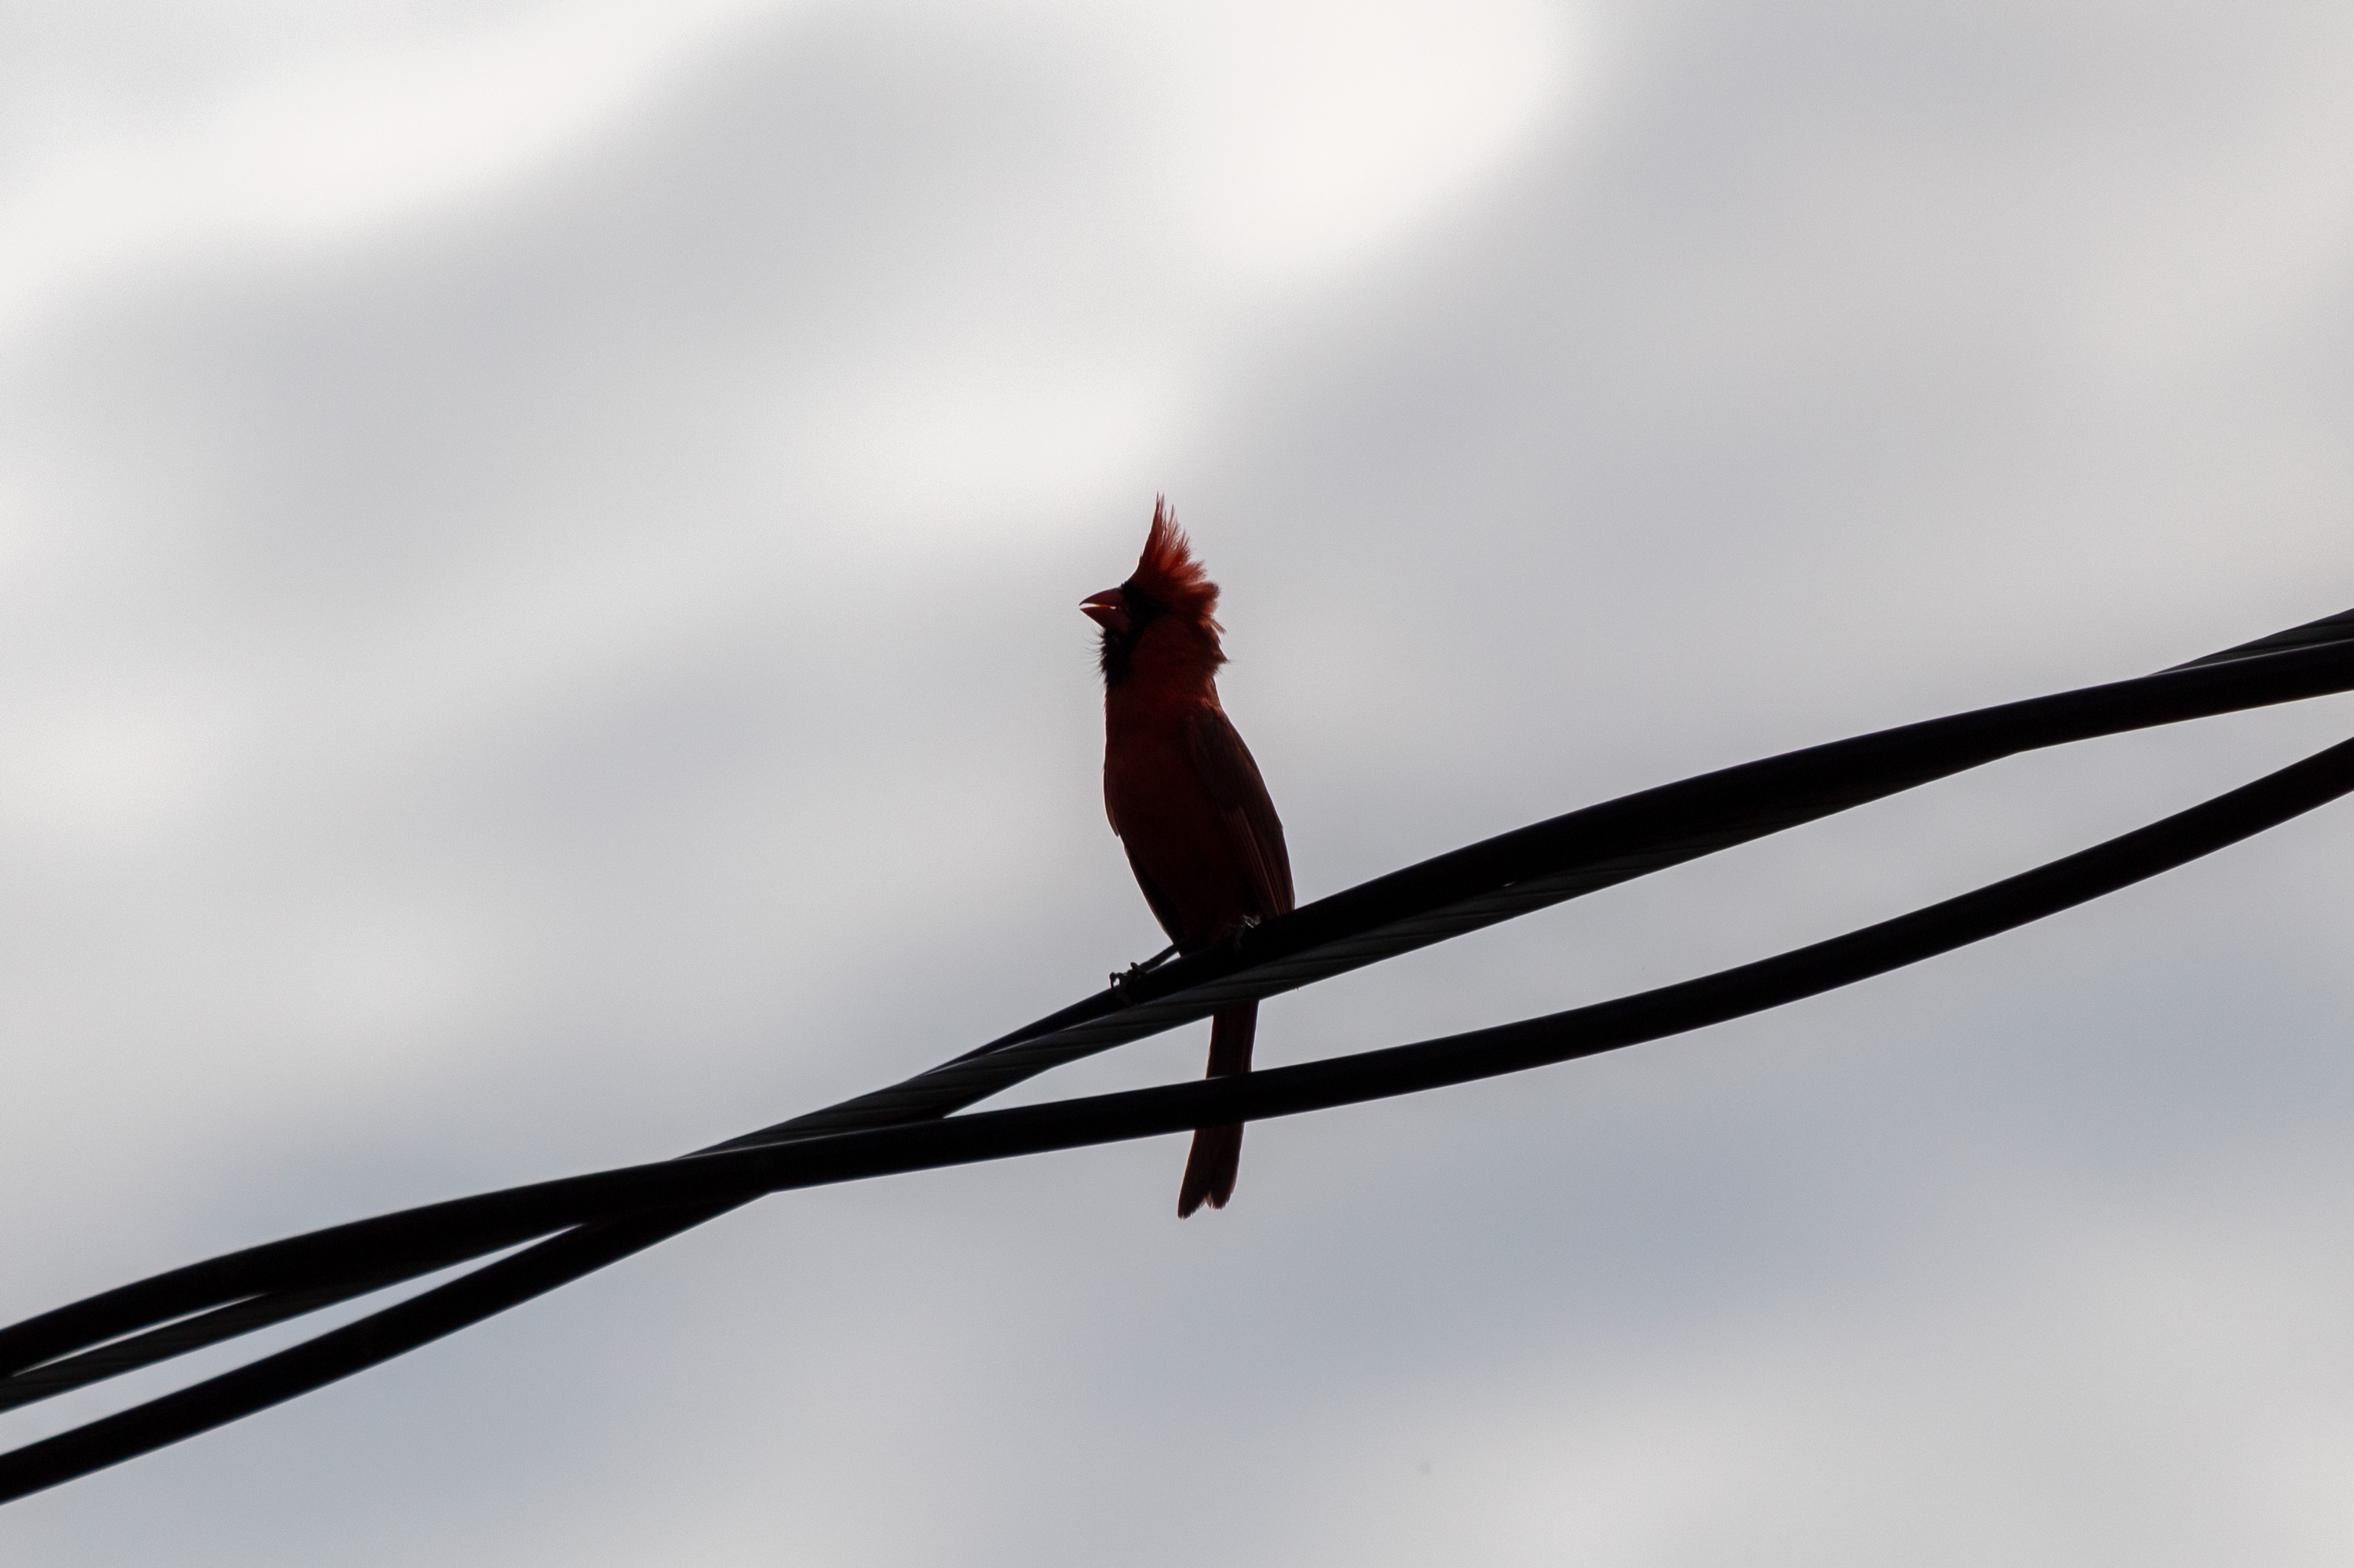 Cardinal sitting on a power line back lit by a cloudy sky